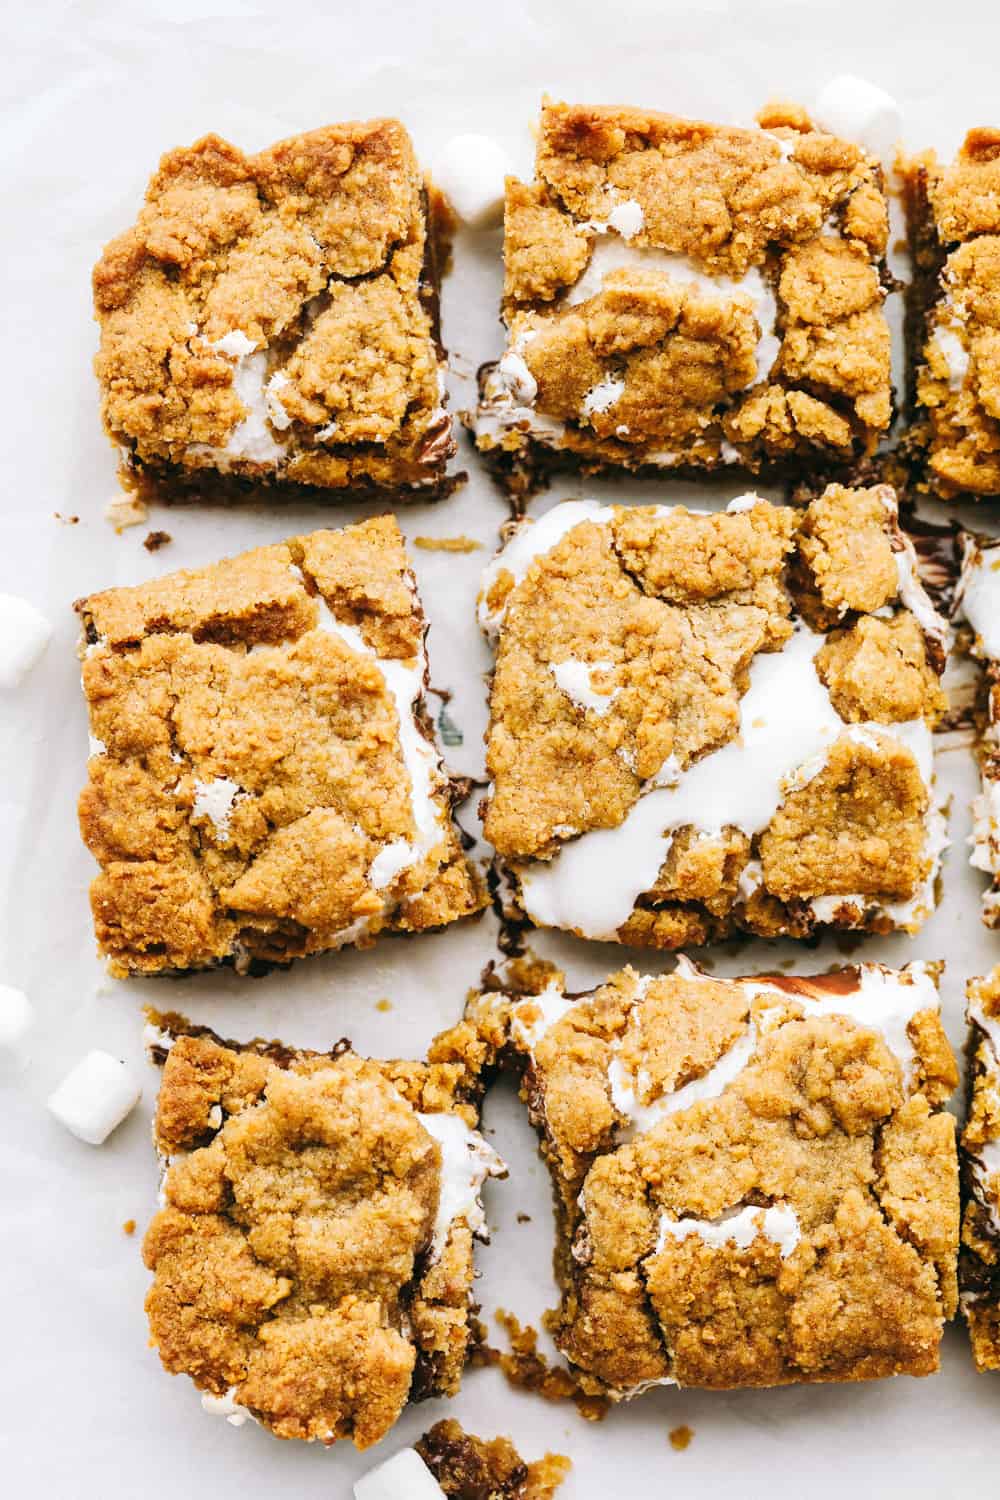 To Die For Ooey Gooey S'mores Bars | The Recipe Critic